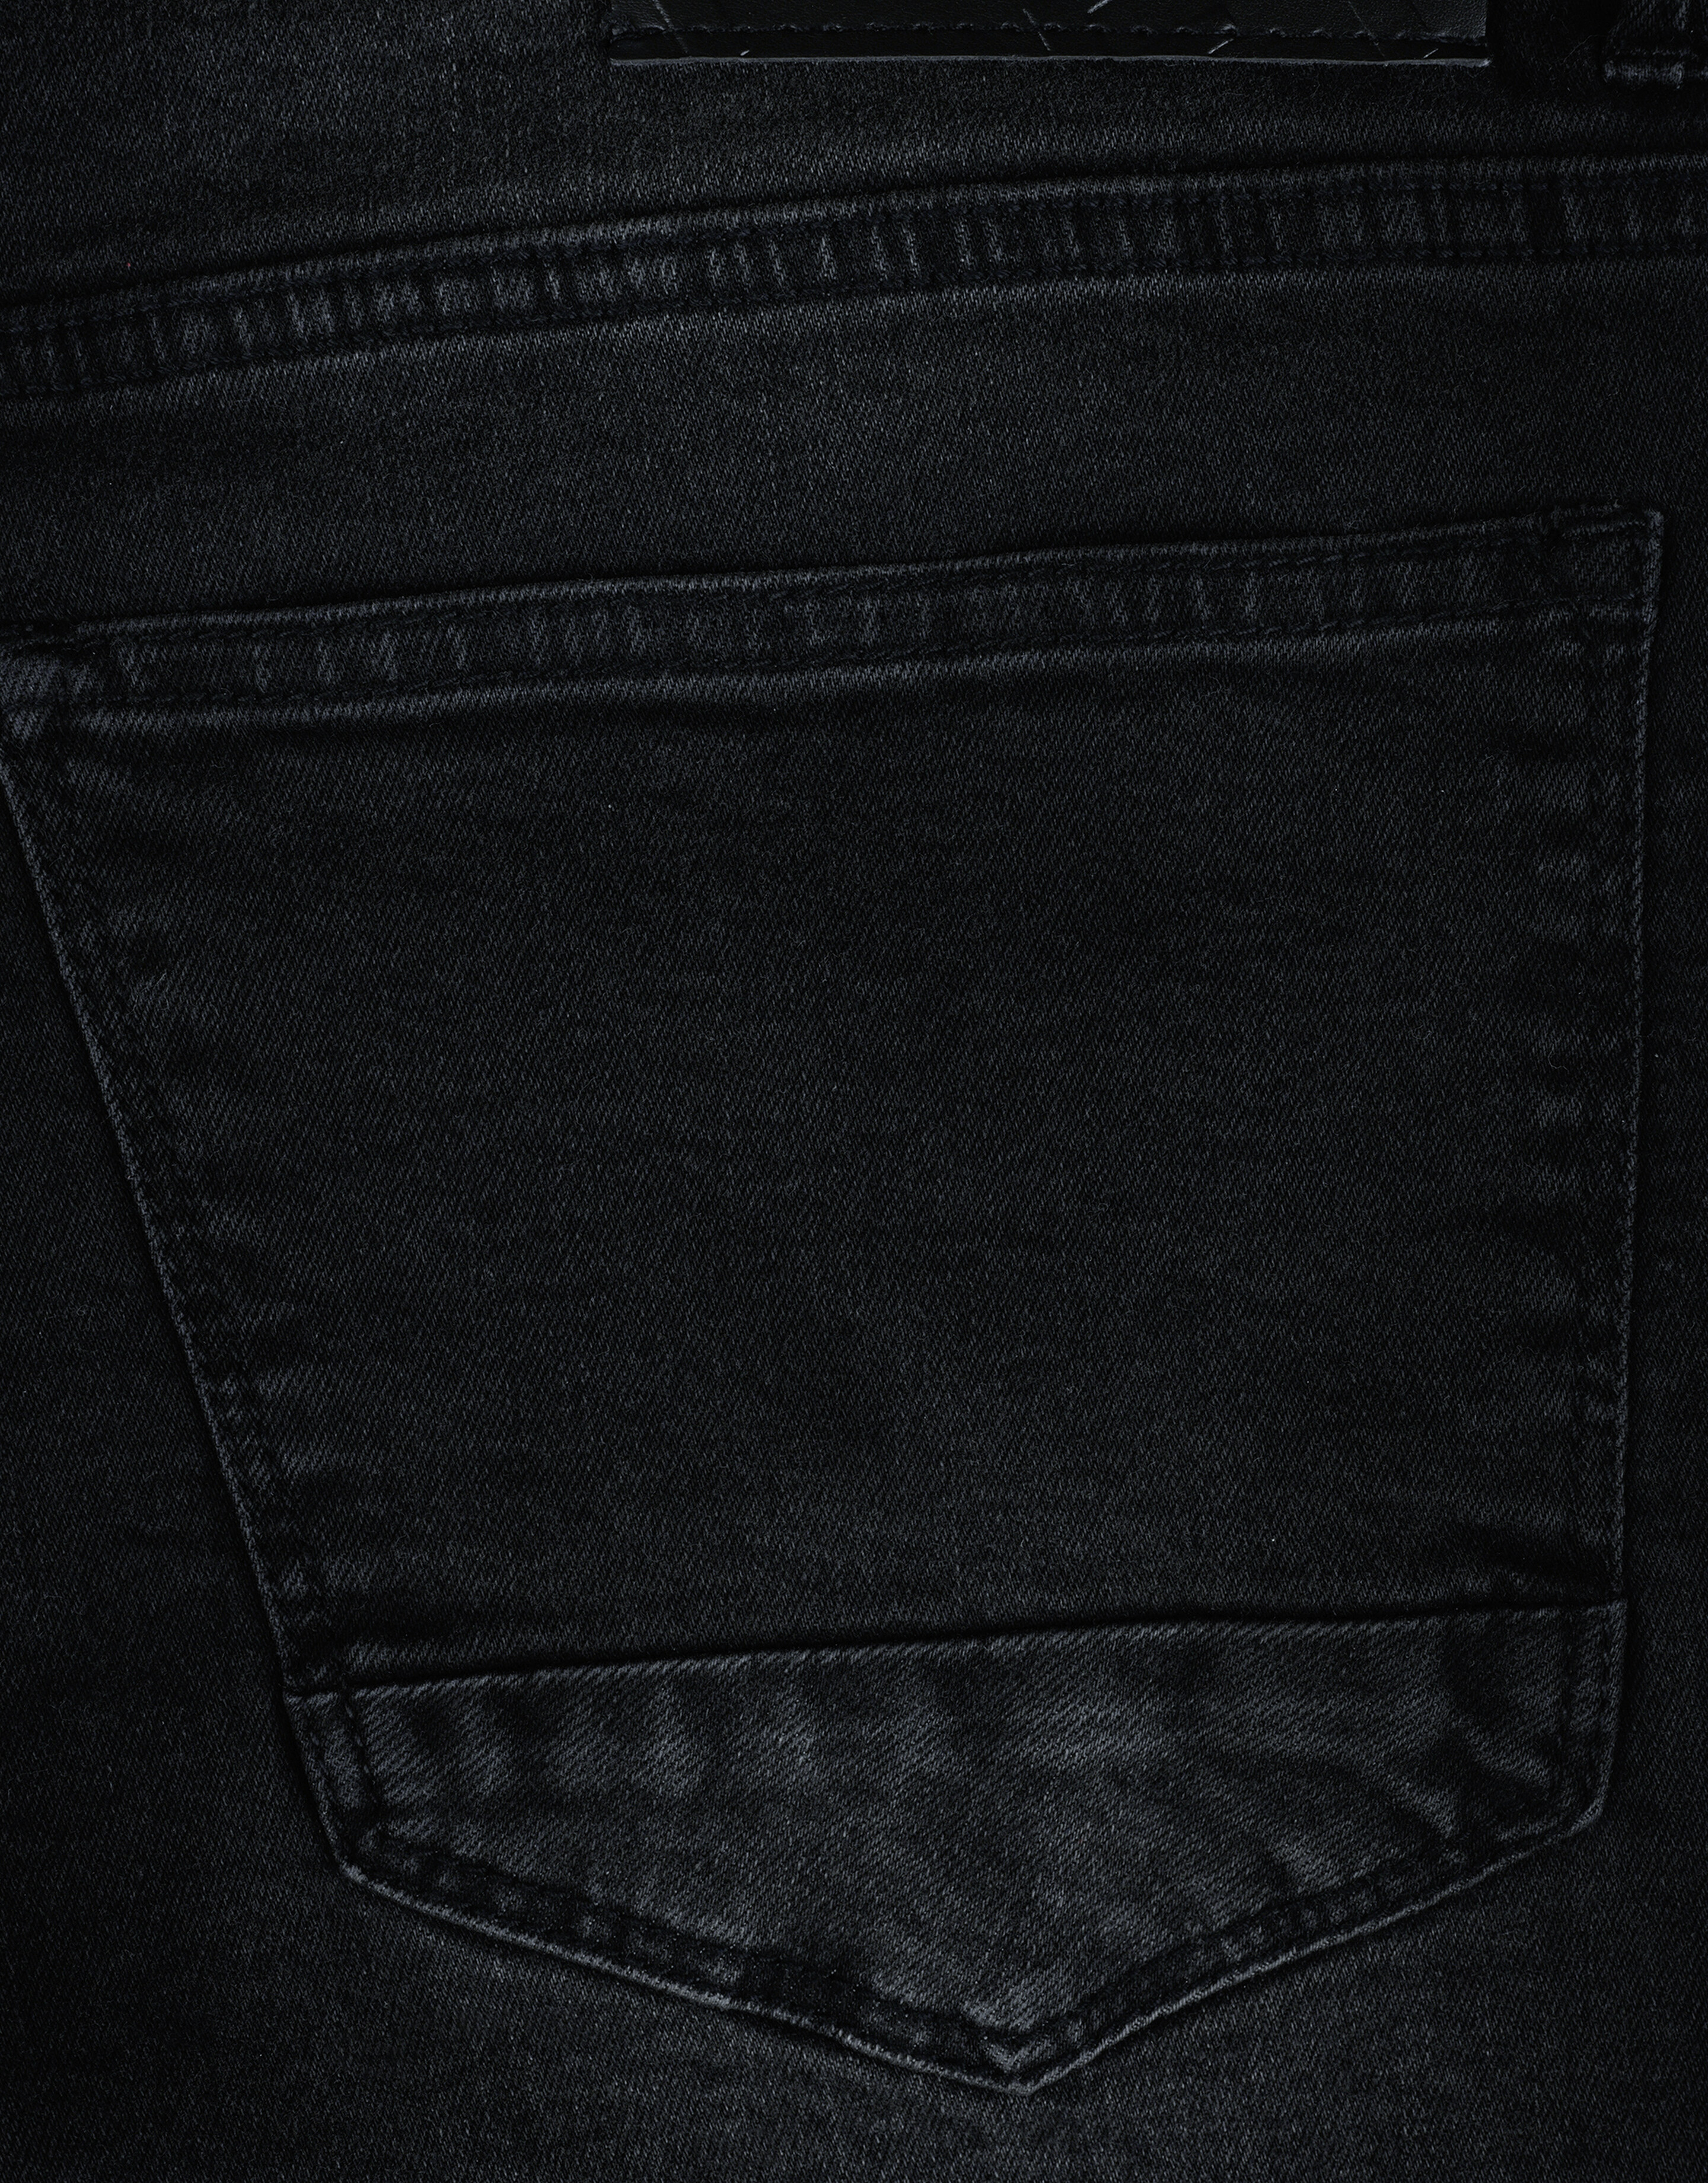 Straight Jeans Washed Black L34 Refill